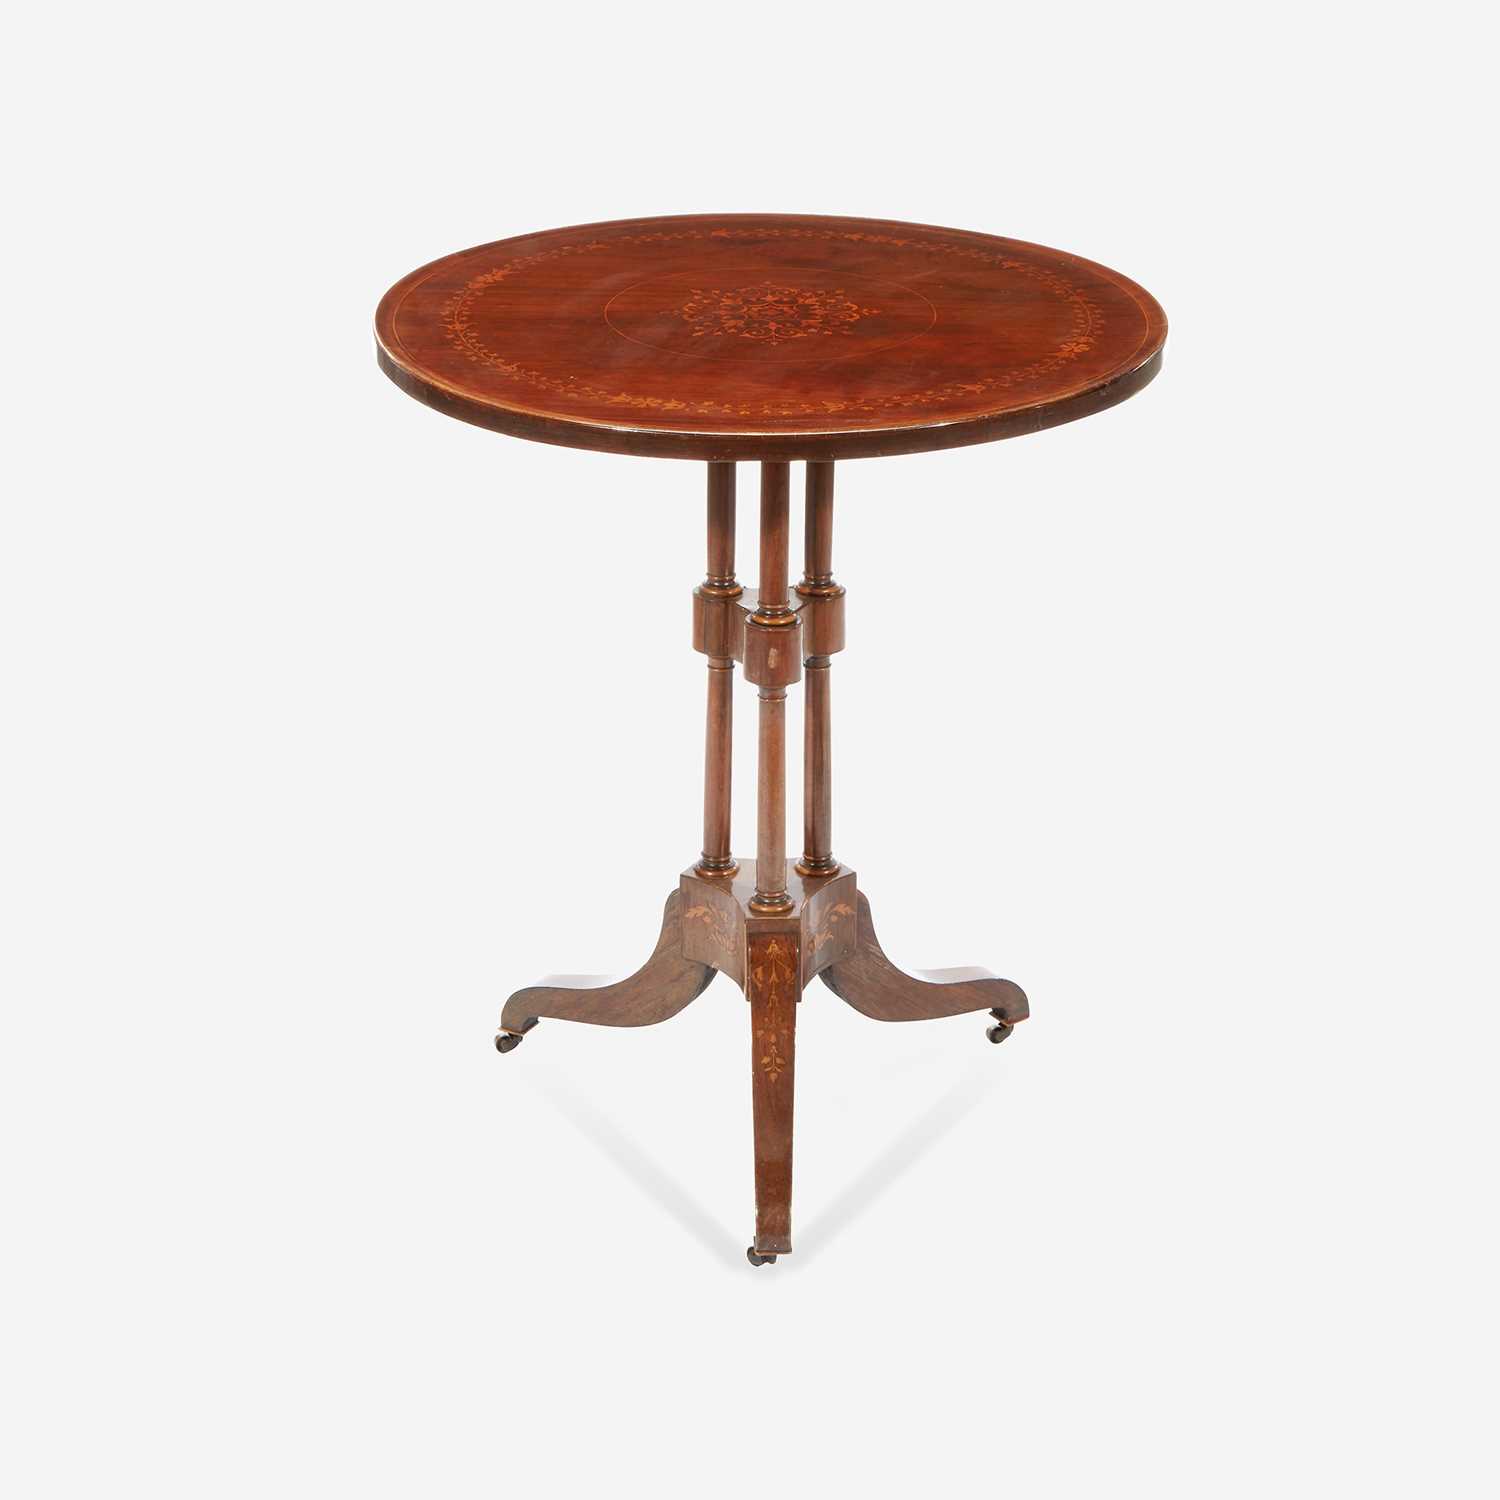 Lot 149 - An Italian Fruitwood Inlaid Rosewood Tilt-Top Occasional Table*